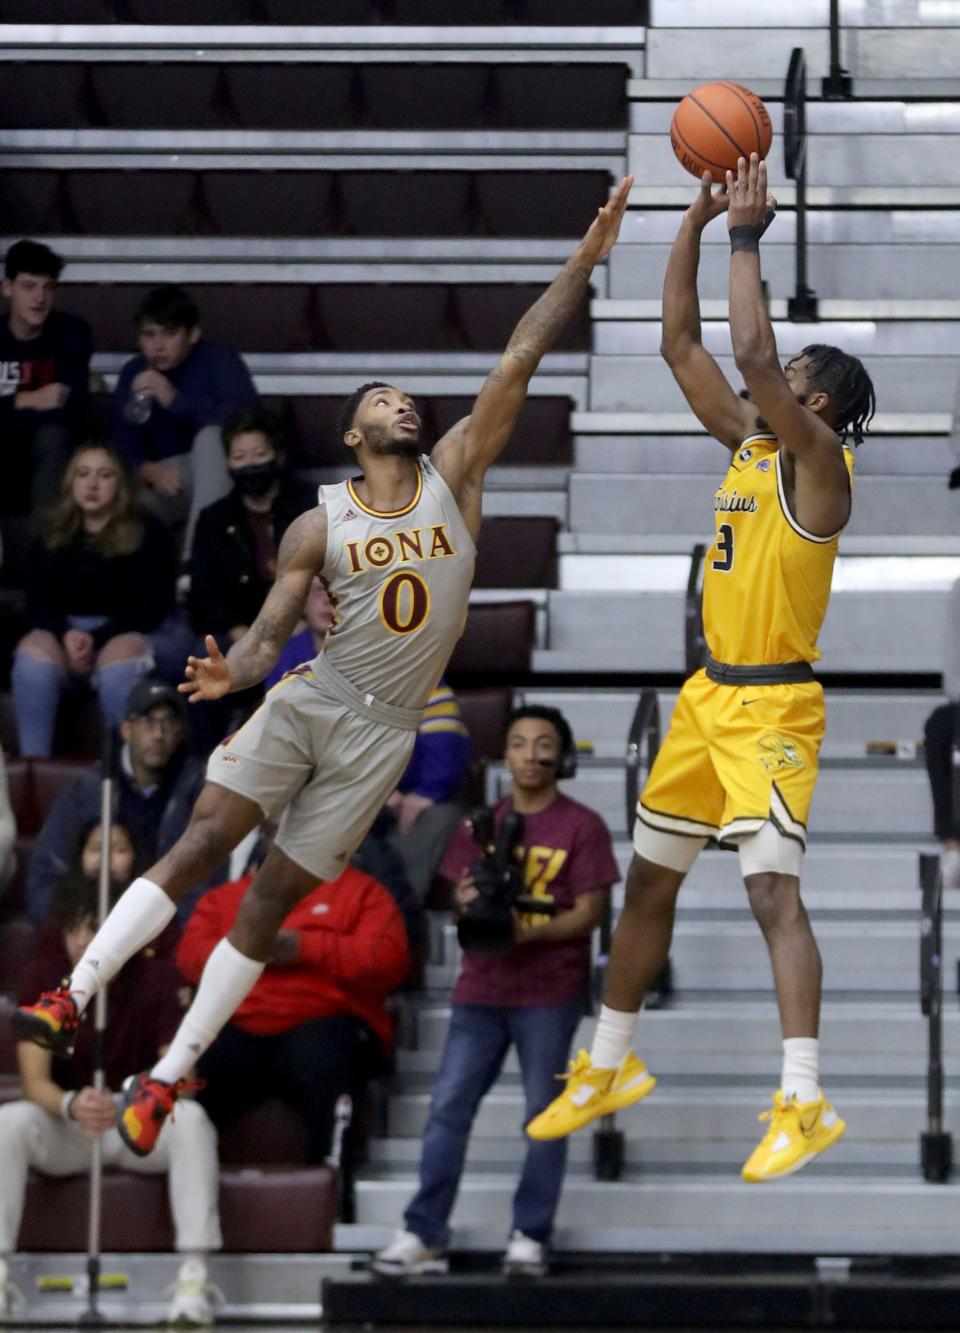 Berrick JeanLouis of Iona defends against Jordan Henderson of Canisius during a MAAC basketball game at Iona University in New Rochelle Dec. 4, 2022. Iona defeated Canisius 90-60.